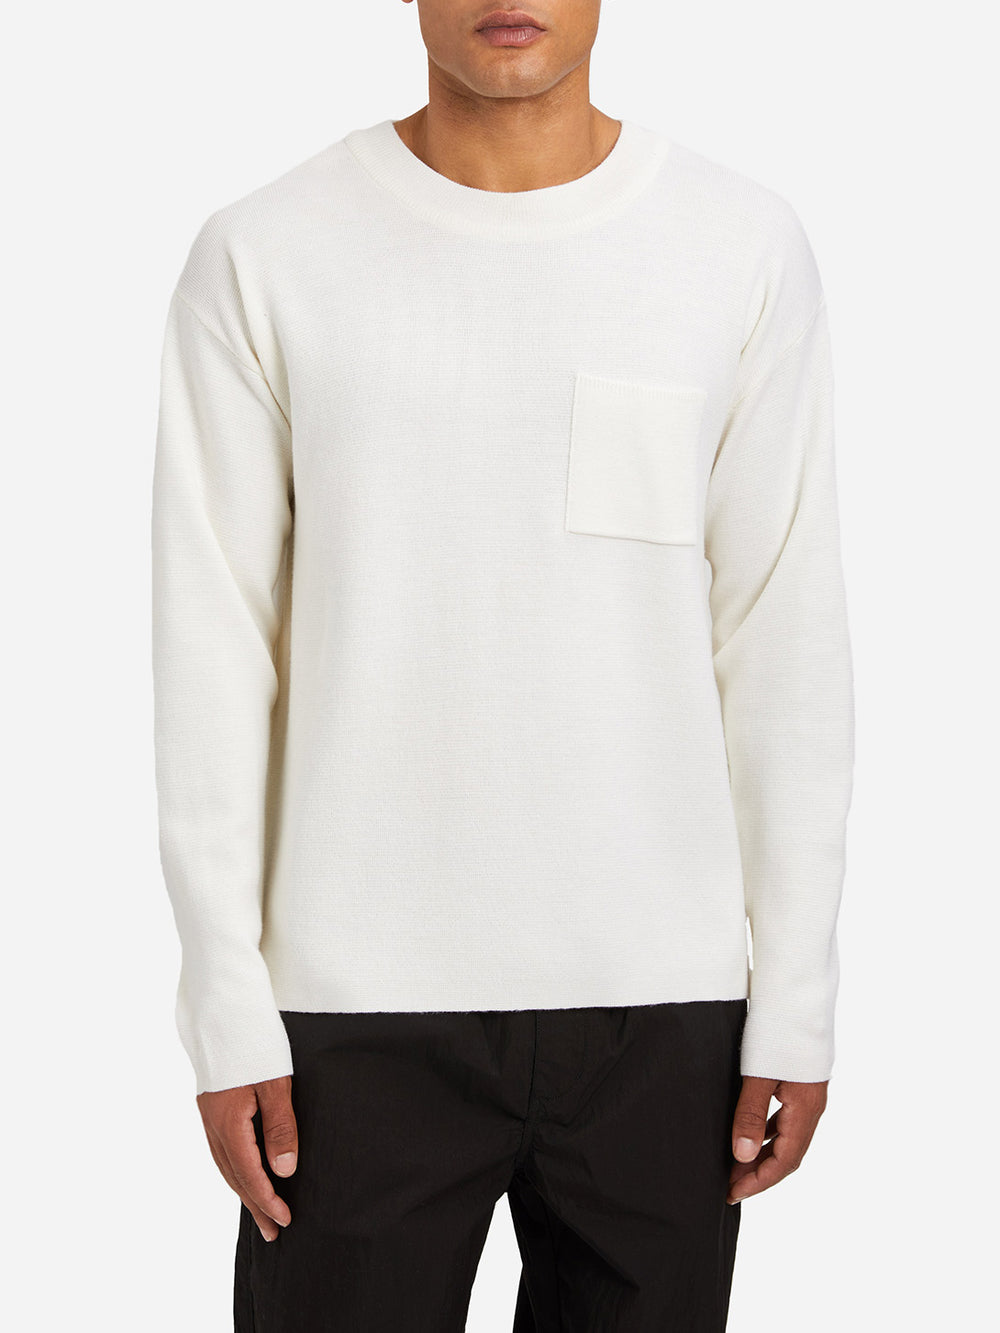 CREAM sweaters for men vincent pocket sweater ons clothing